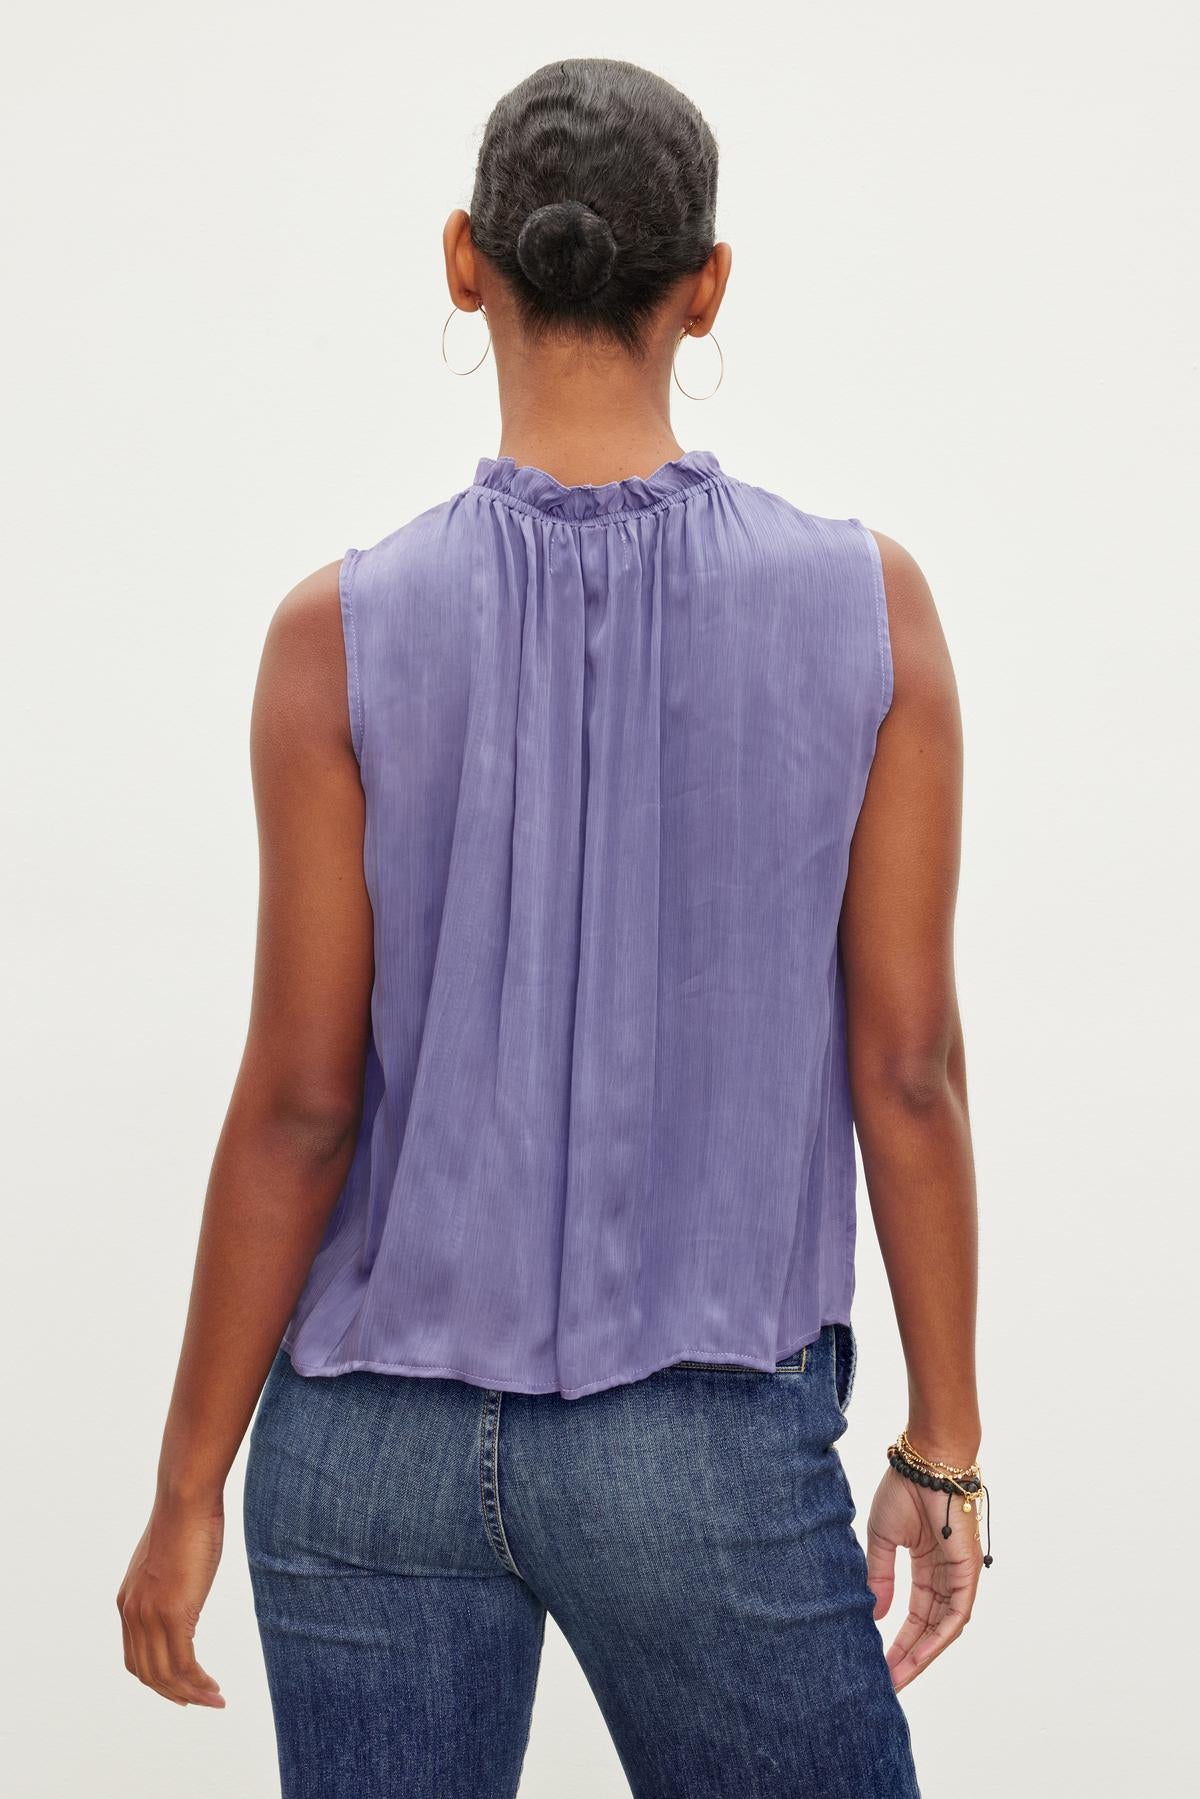 A person is wearing a purple KIANA RUFFLE NECK TANK TOP by Velvet by Graham & Spencer and blue jeans, photographed from the back.-37073693311169